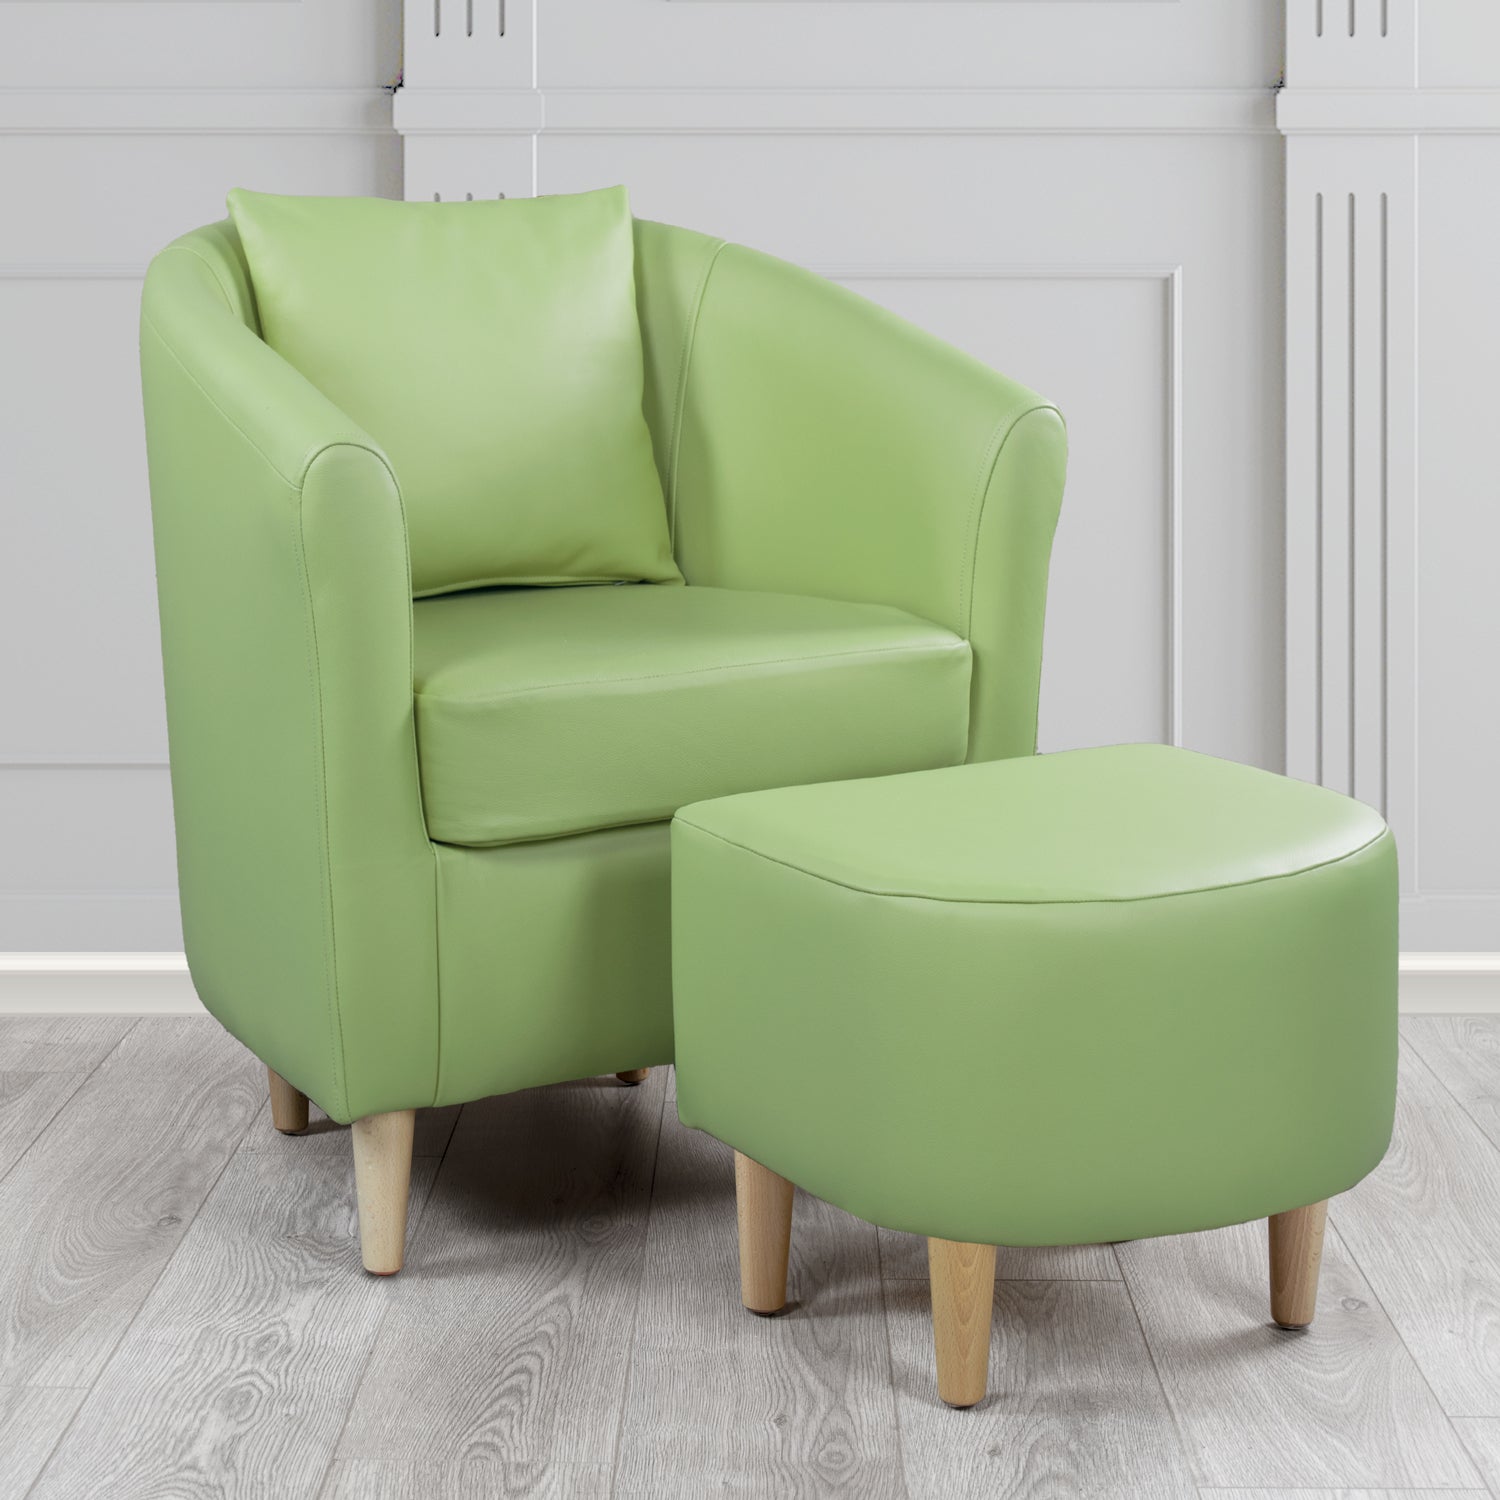 St Tropez Shelly Pea Green Crib 5 Genuine Leather Tub Chair & Footstool Set With Scatter Cushion (6619511914538)